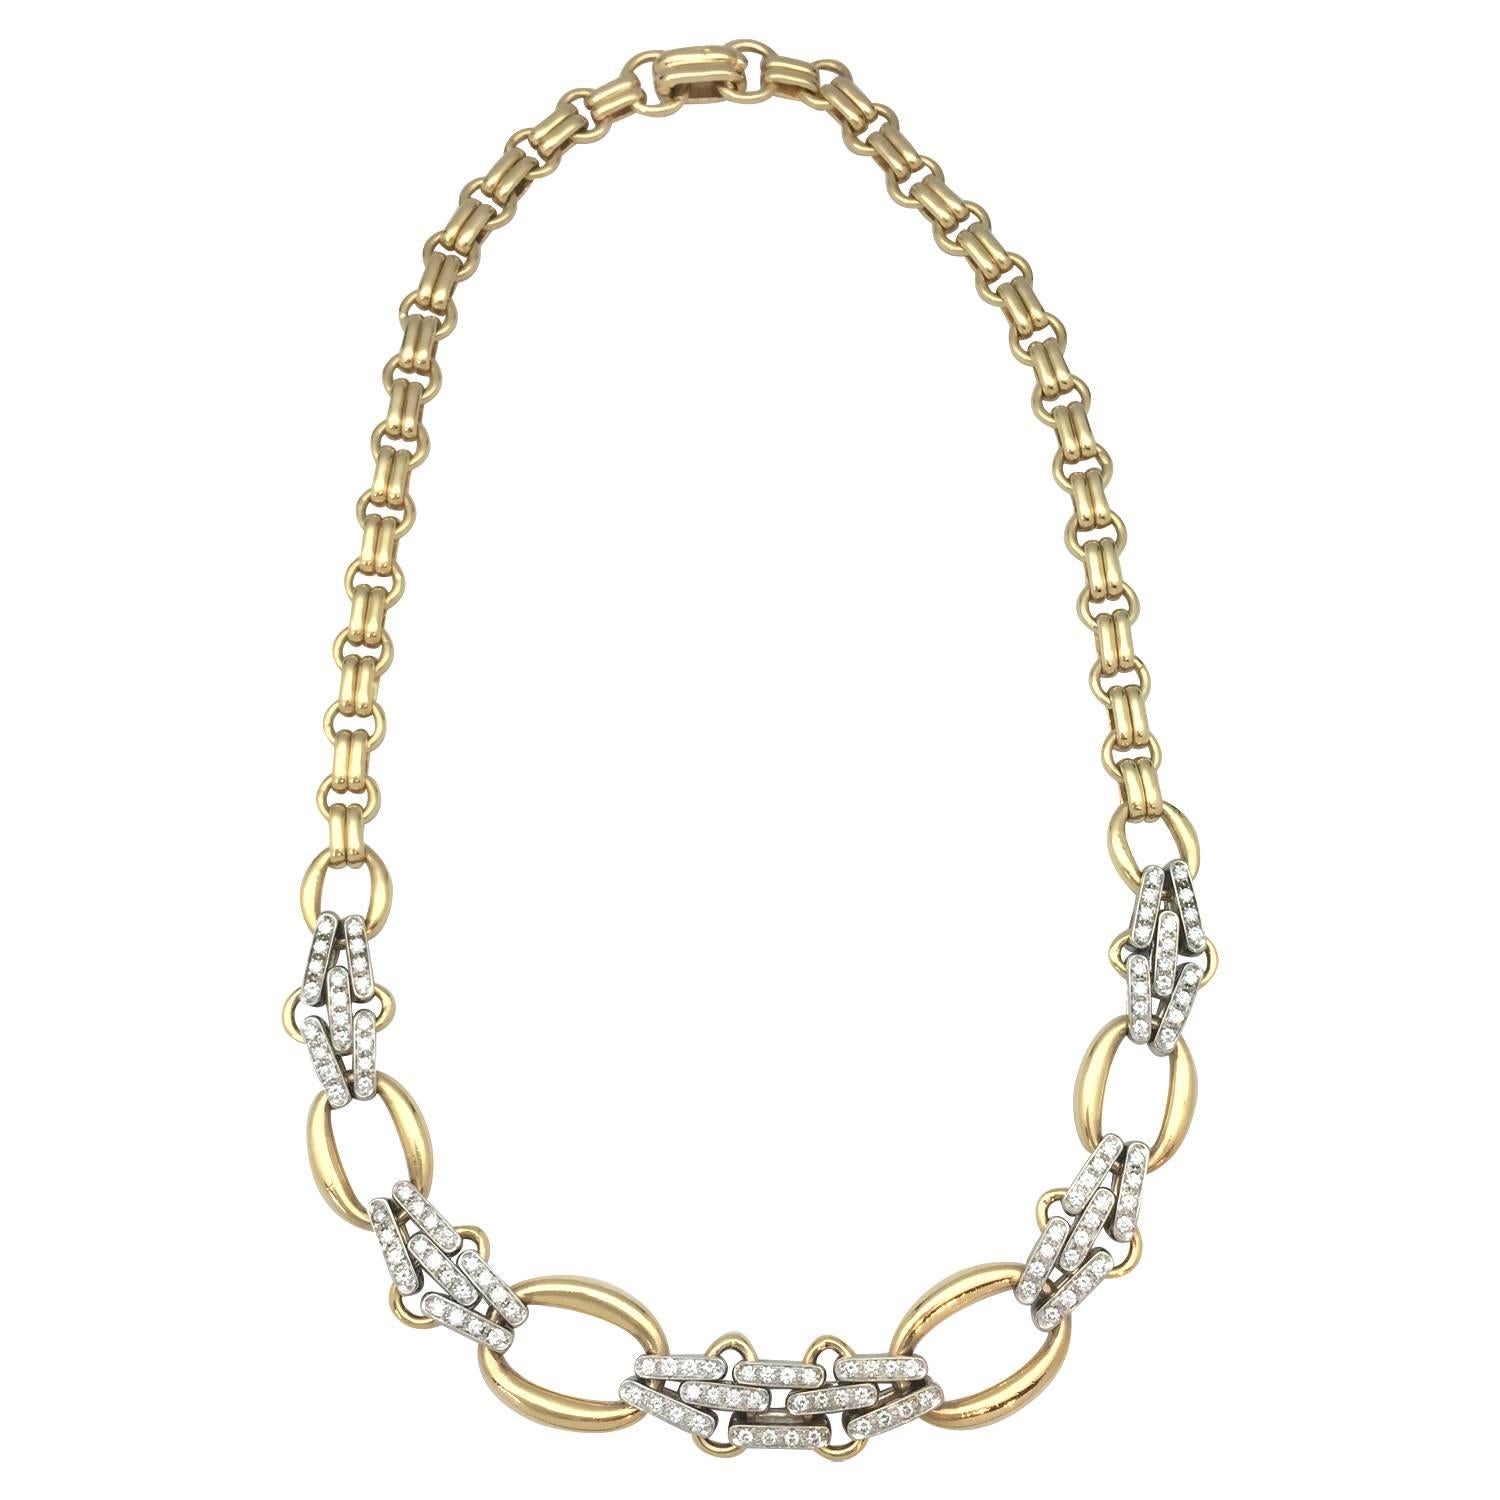 A 750/000 yellow and white gold Pomellato necklace made with six oval 750/000 yellow gold links, five diamonds links in the center of the necklace and a 750/000 yellow gold chain.
Diamond approximate weight : about 3,50 carats.
Circa 1995
